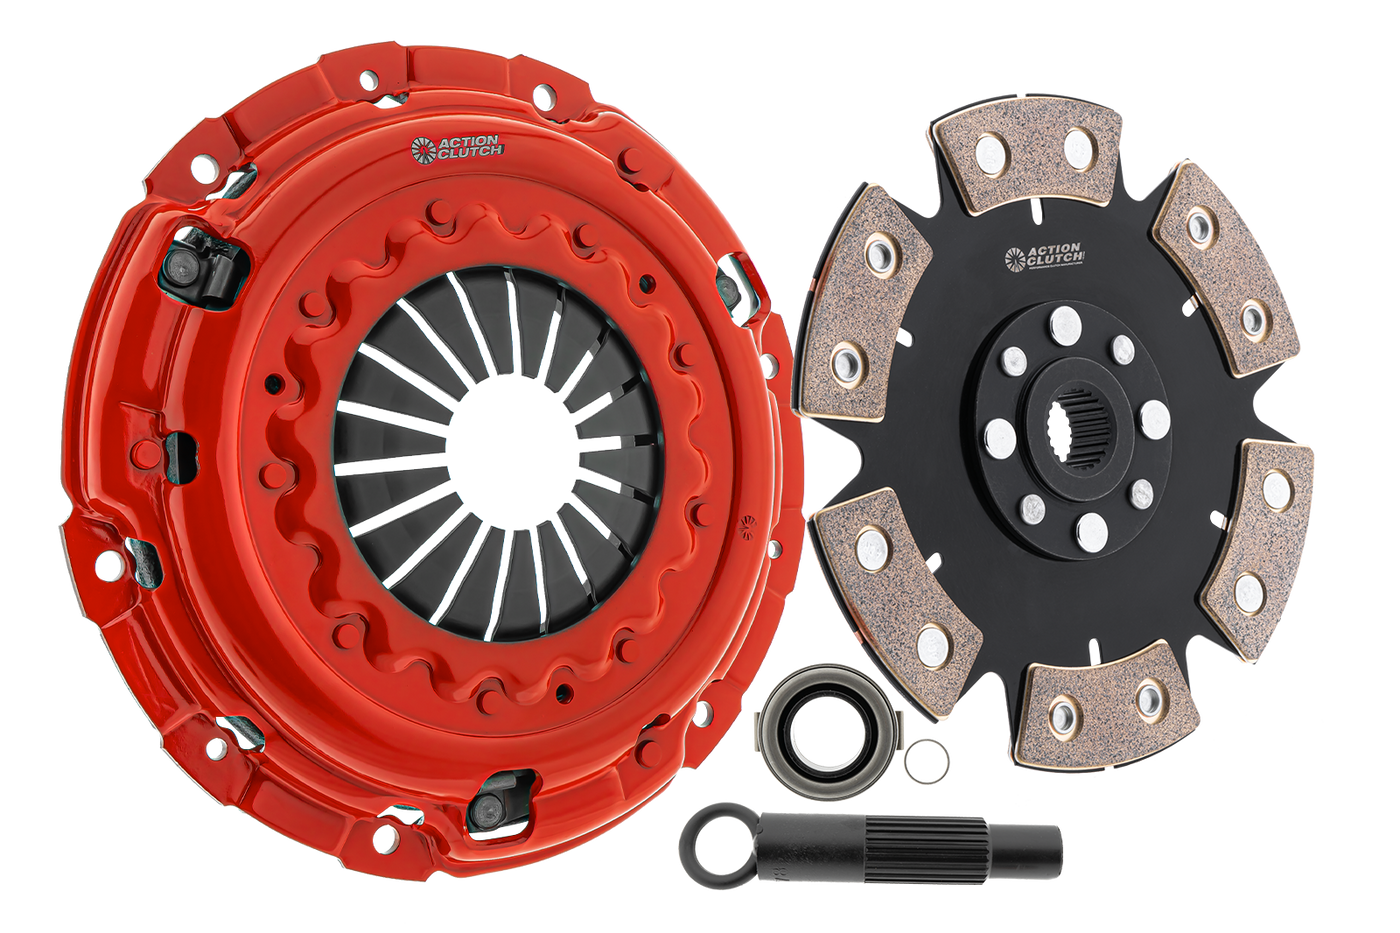 Stage 6 Clutch Kit (2MD) for Nissan 300ZX 1989-1996 3.0L (VG30DE) Non-Turbo